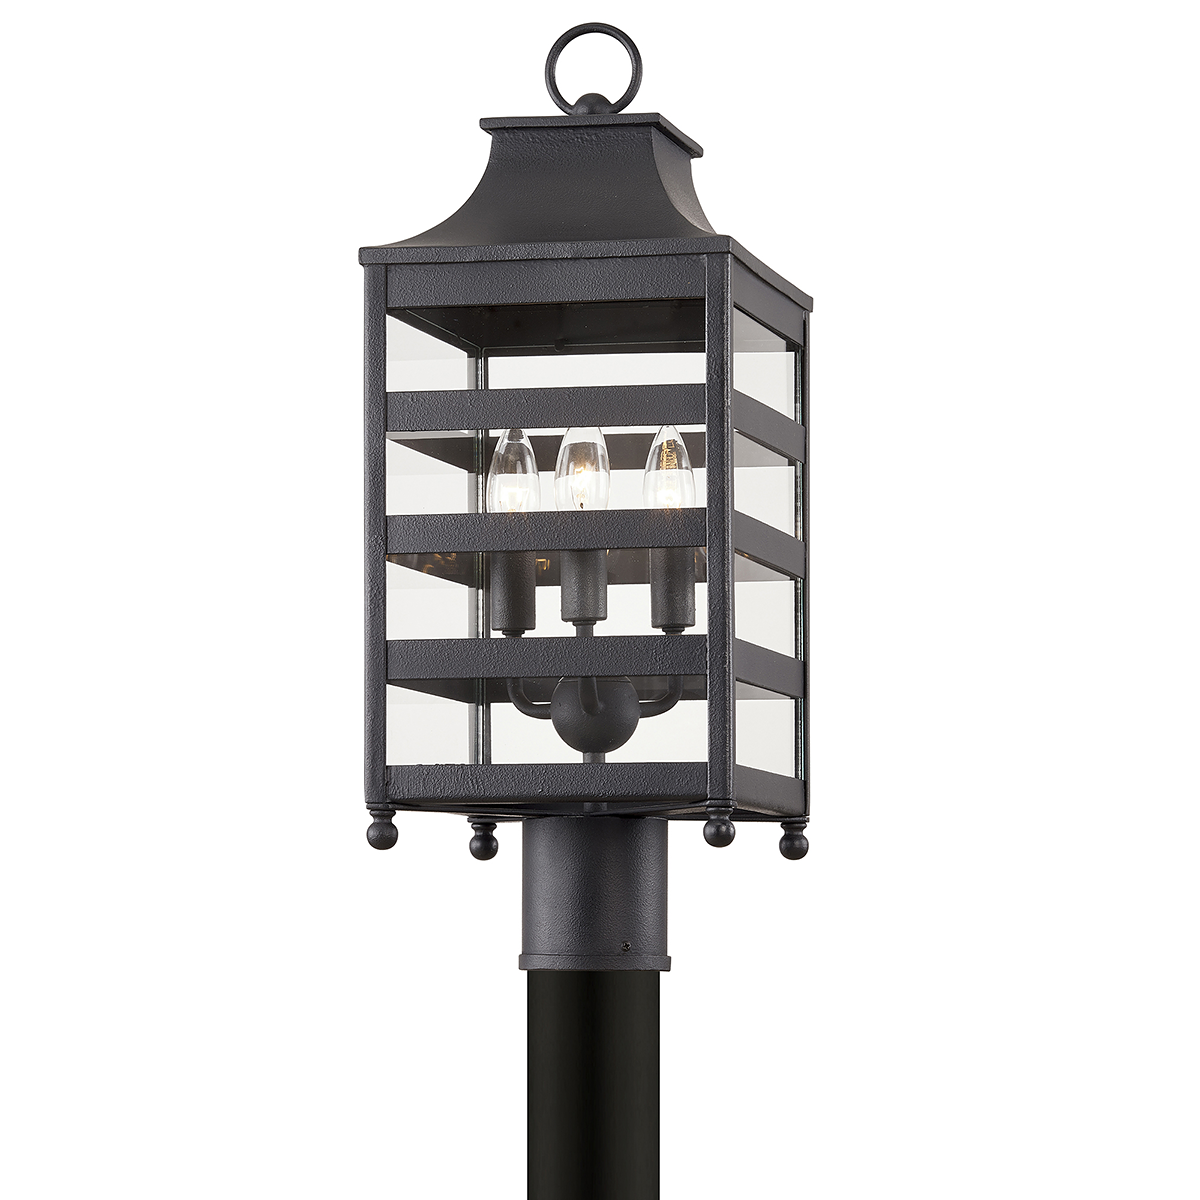 Troy Lighting HOLSTROM 3LT POST P7435 Outdoor l Post/Pier Mounts Troy Lighting FORGED IRON  